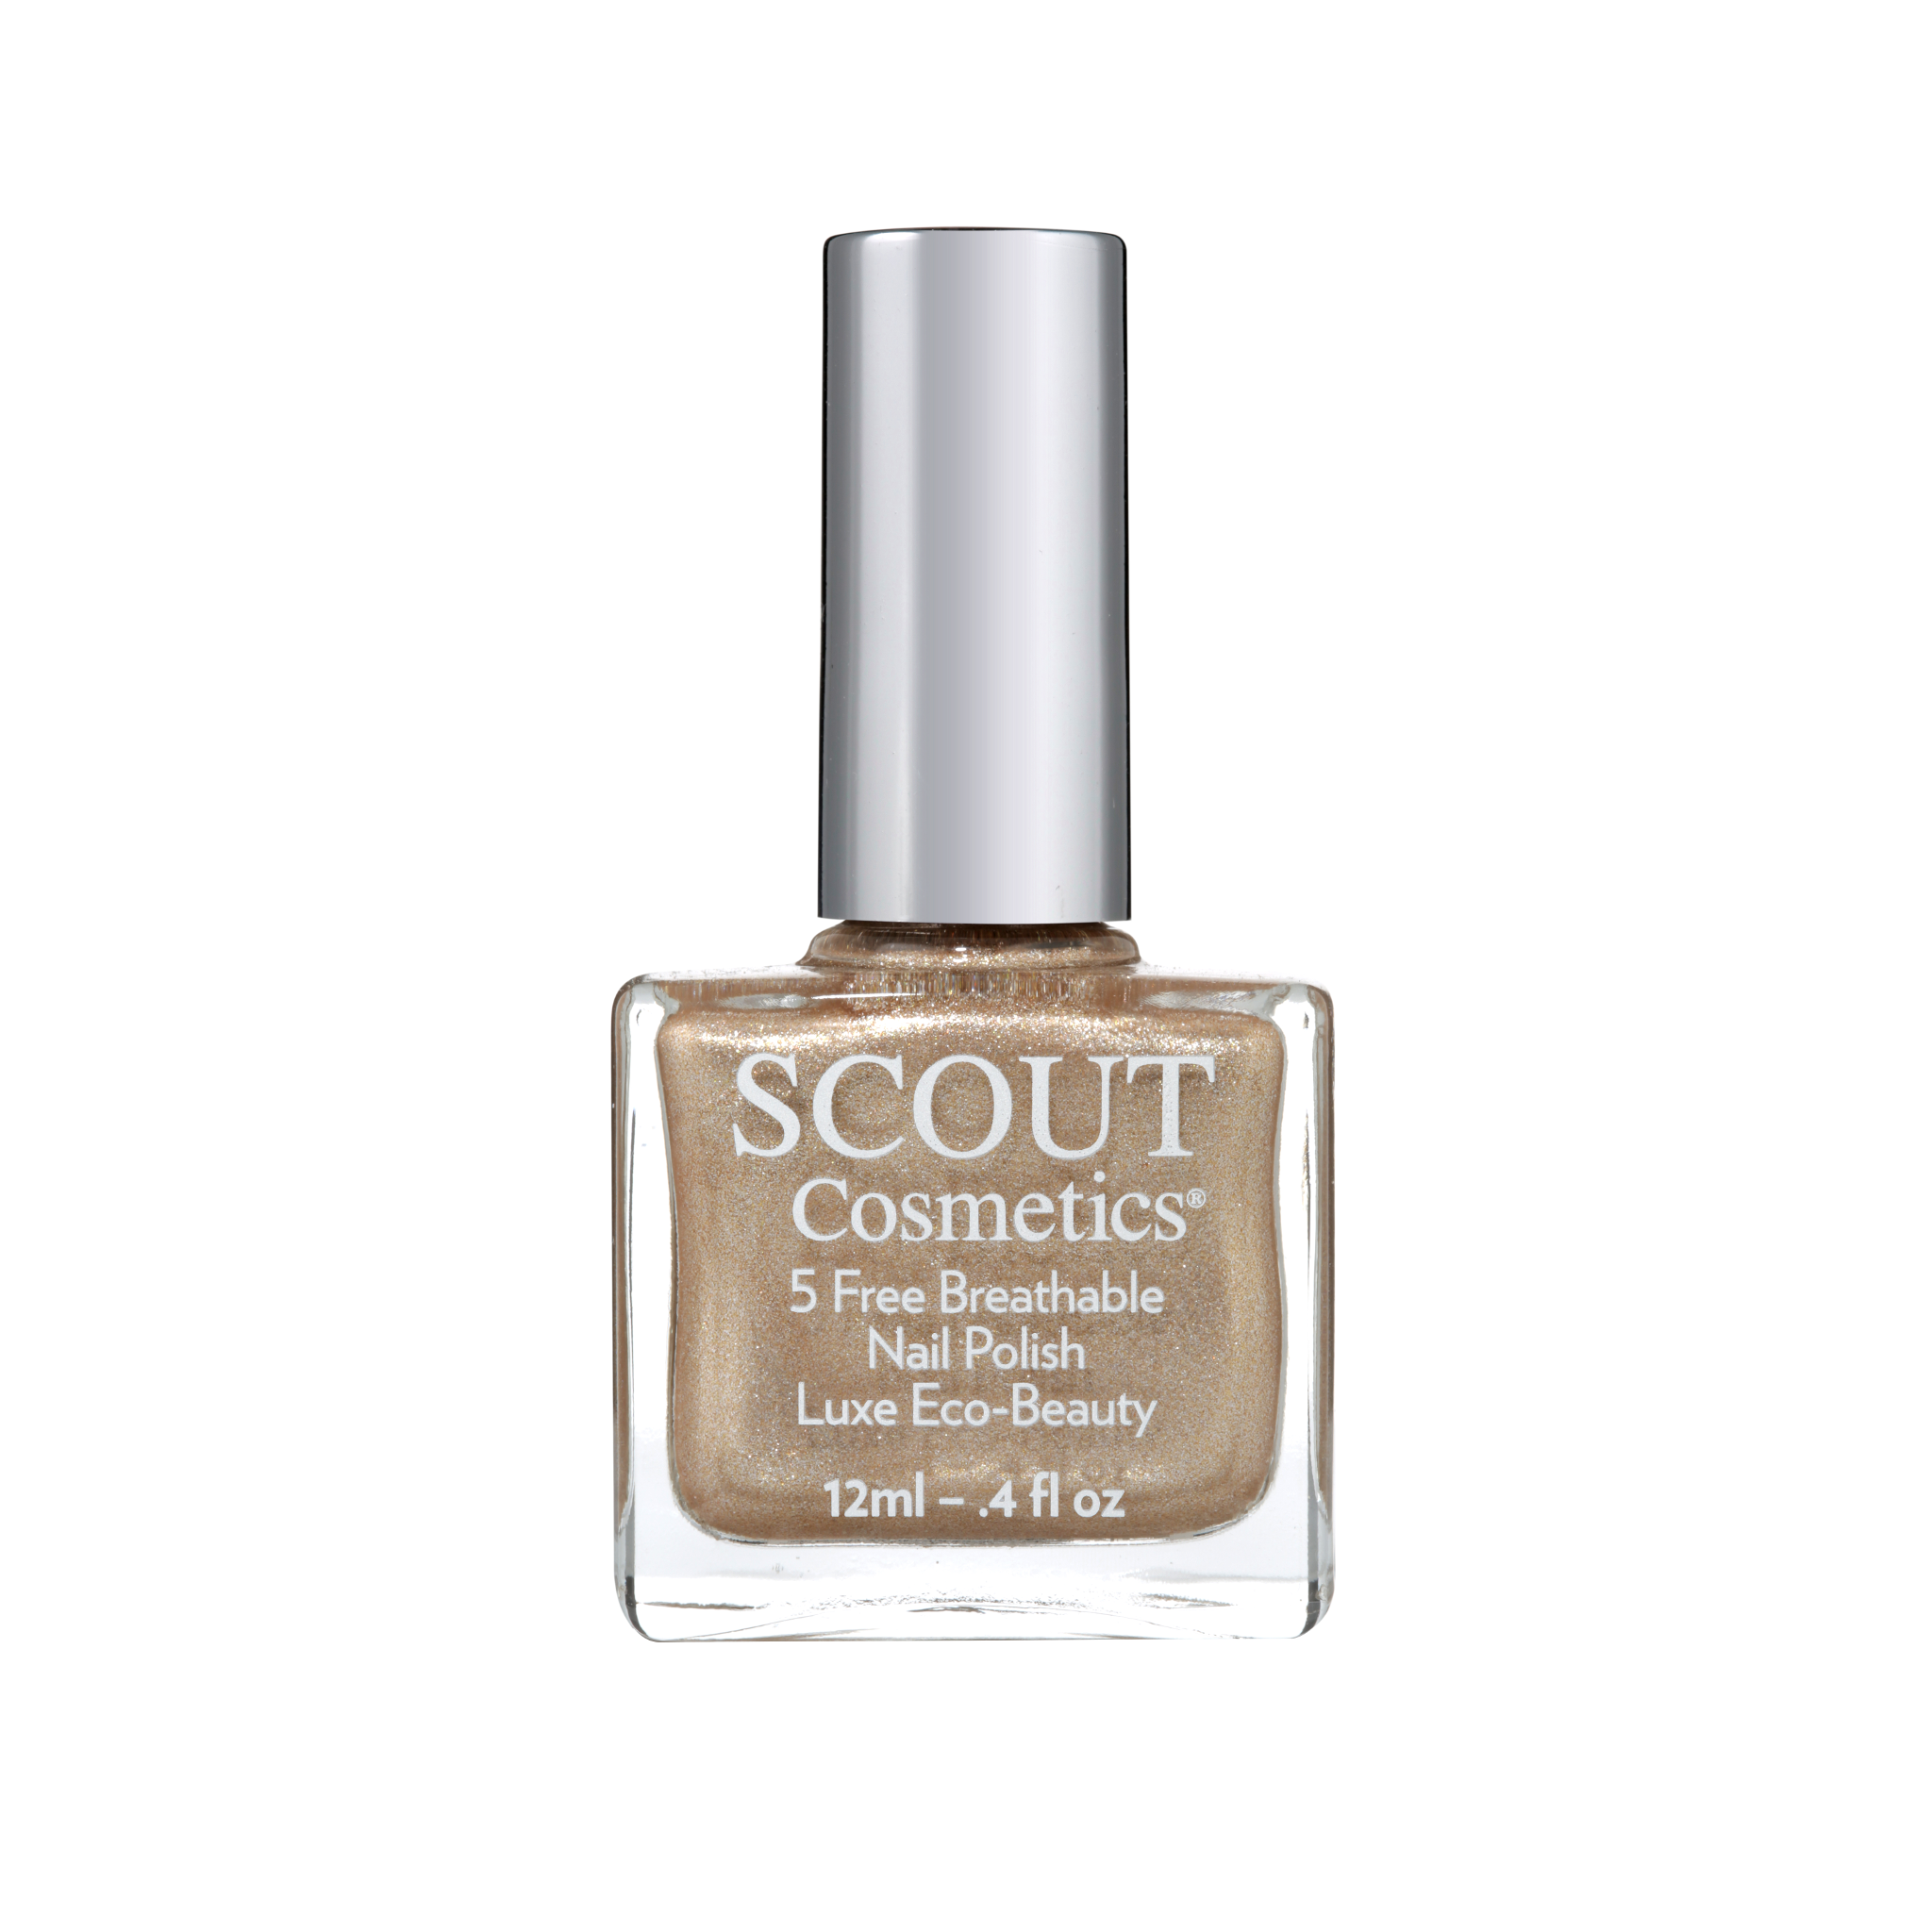 SCOUT Cosmetics Nail Polish - Truly Madly Deeply